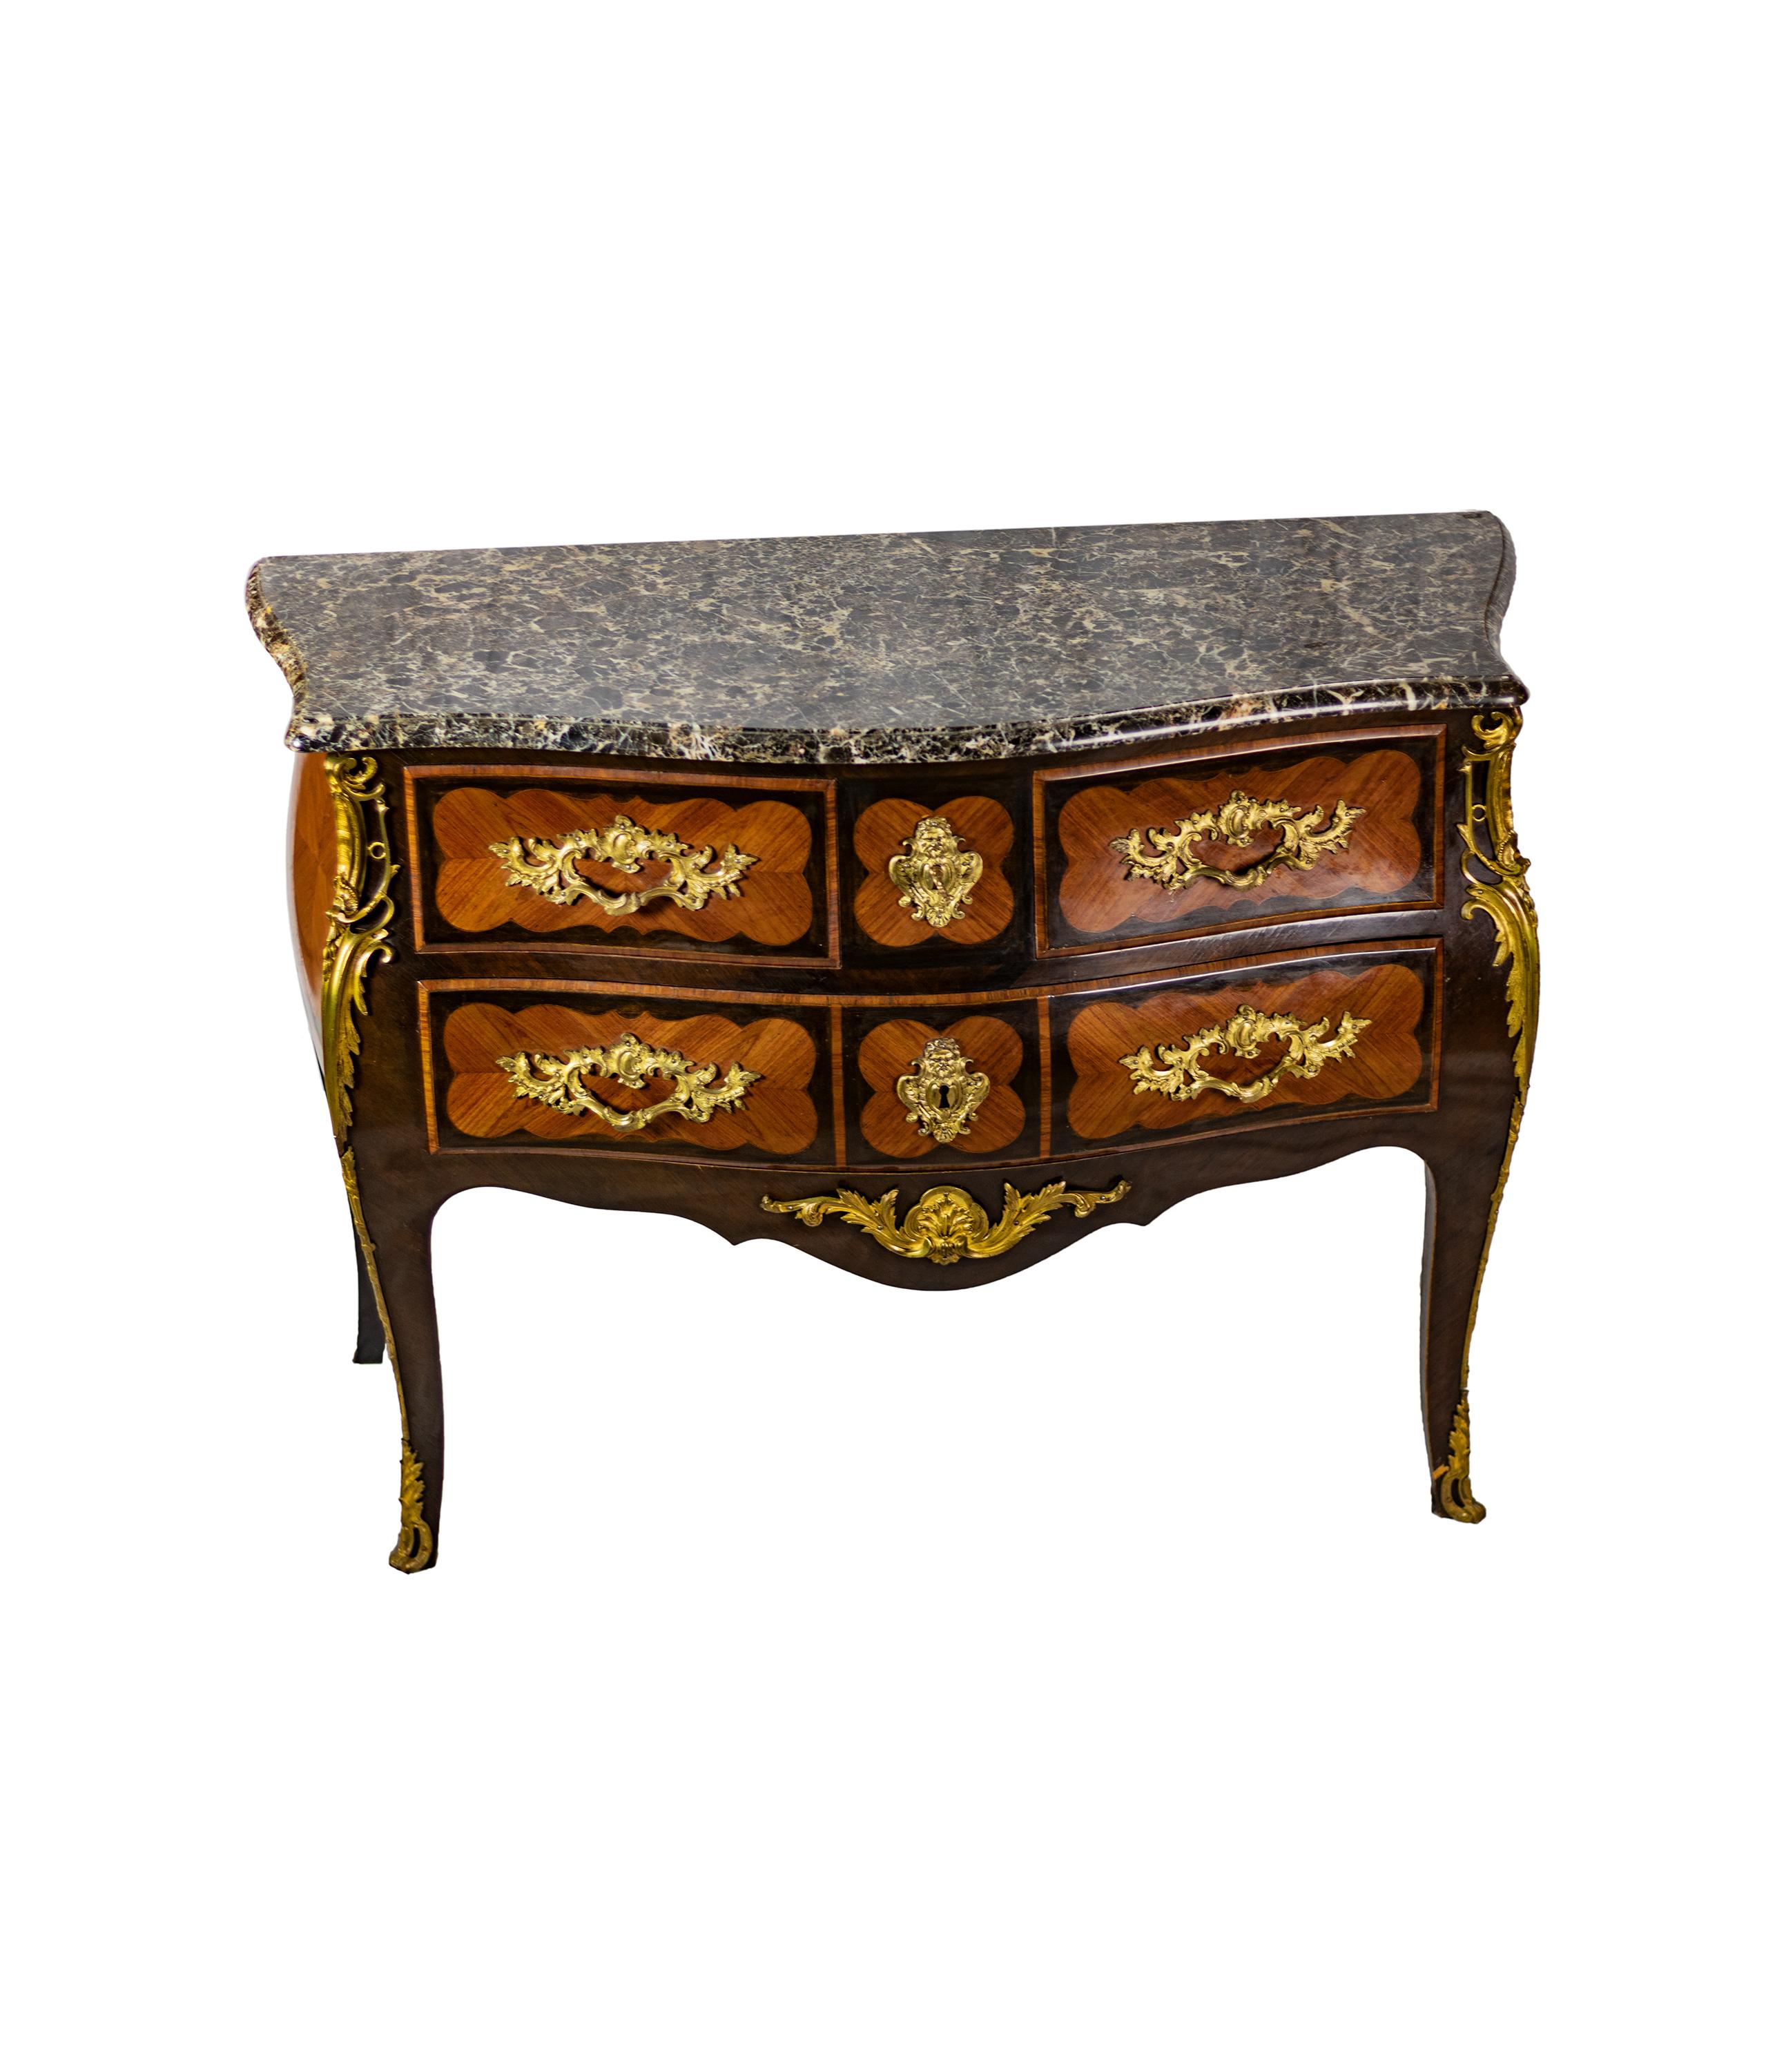 A kingwood commode with a bombé front, two drawers spanning the full width of the piece, and two smaller drawers above, tapering legs with scrolled caps, characteristic of Louis XV, finely grained rosewood and kingwood veneer and gold-plated bronze